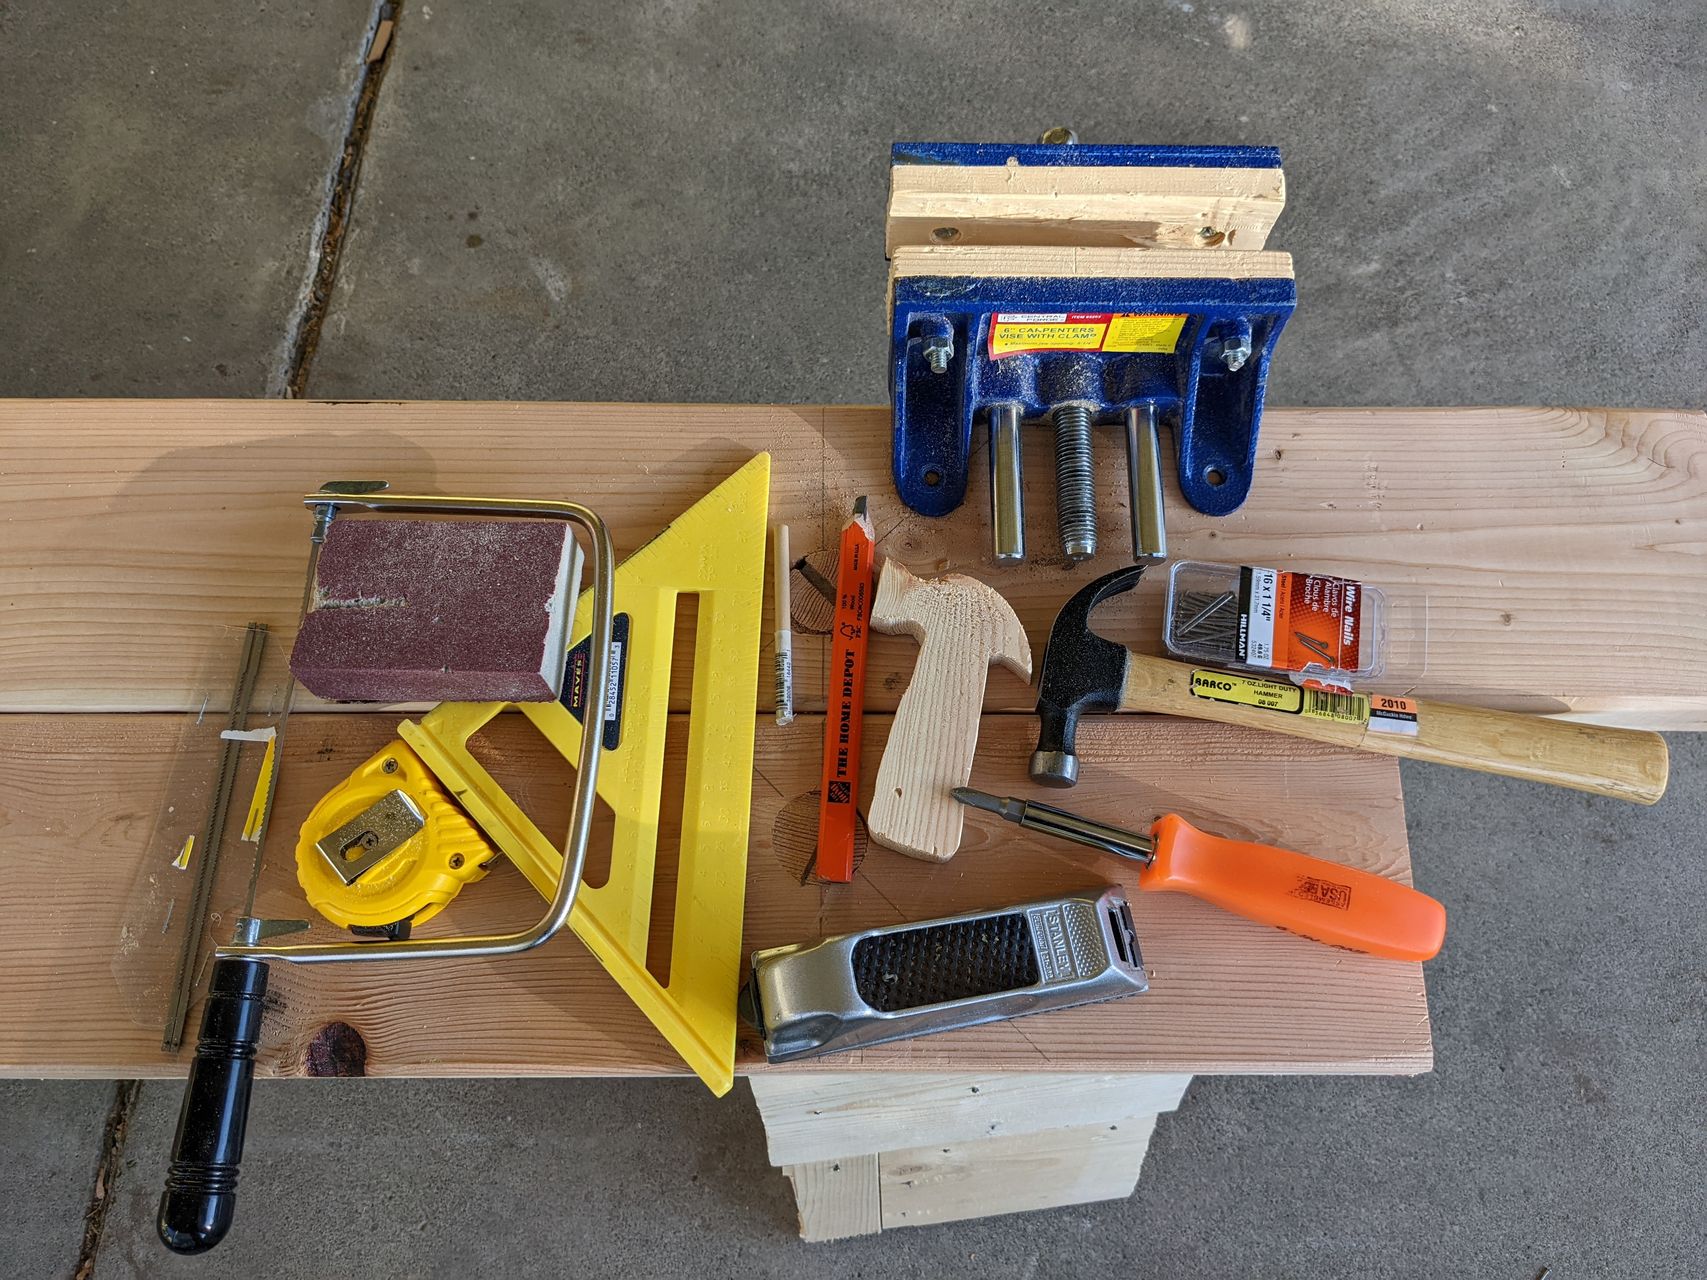 kid tools spread out on workbench